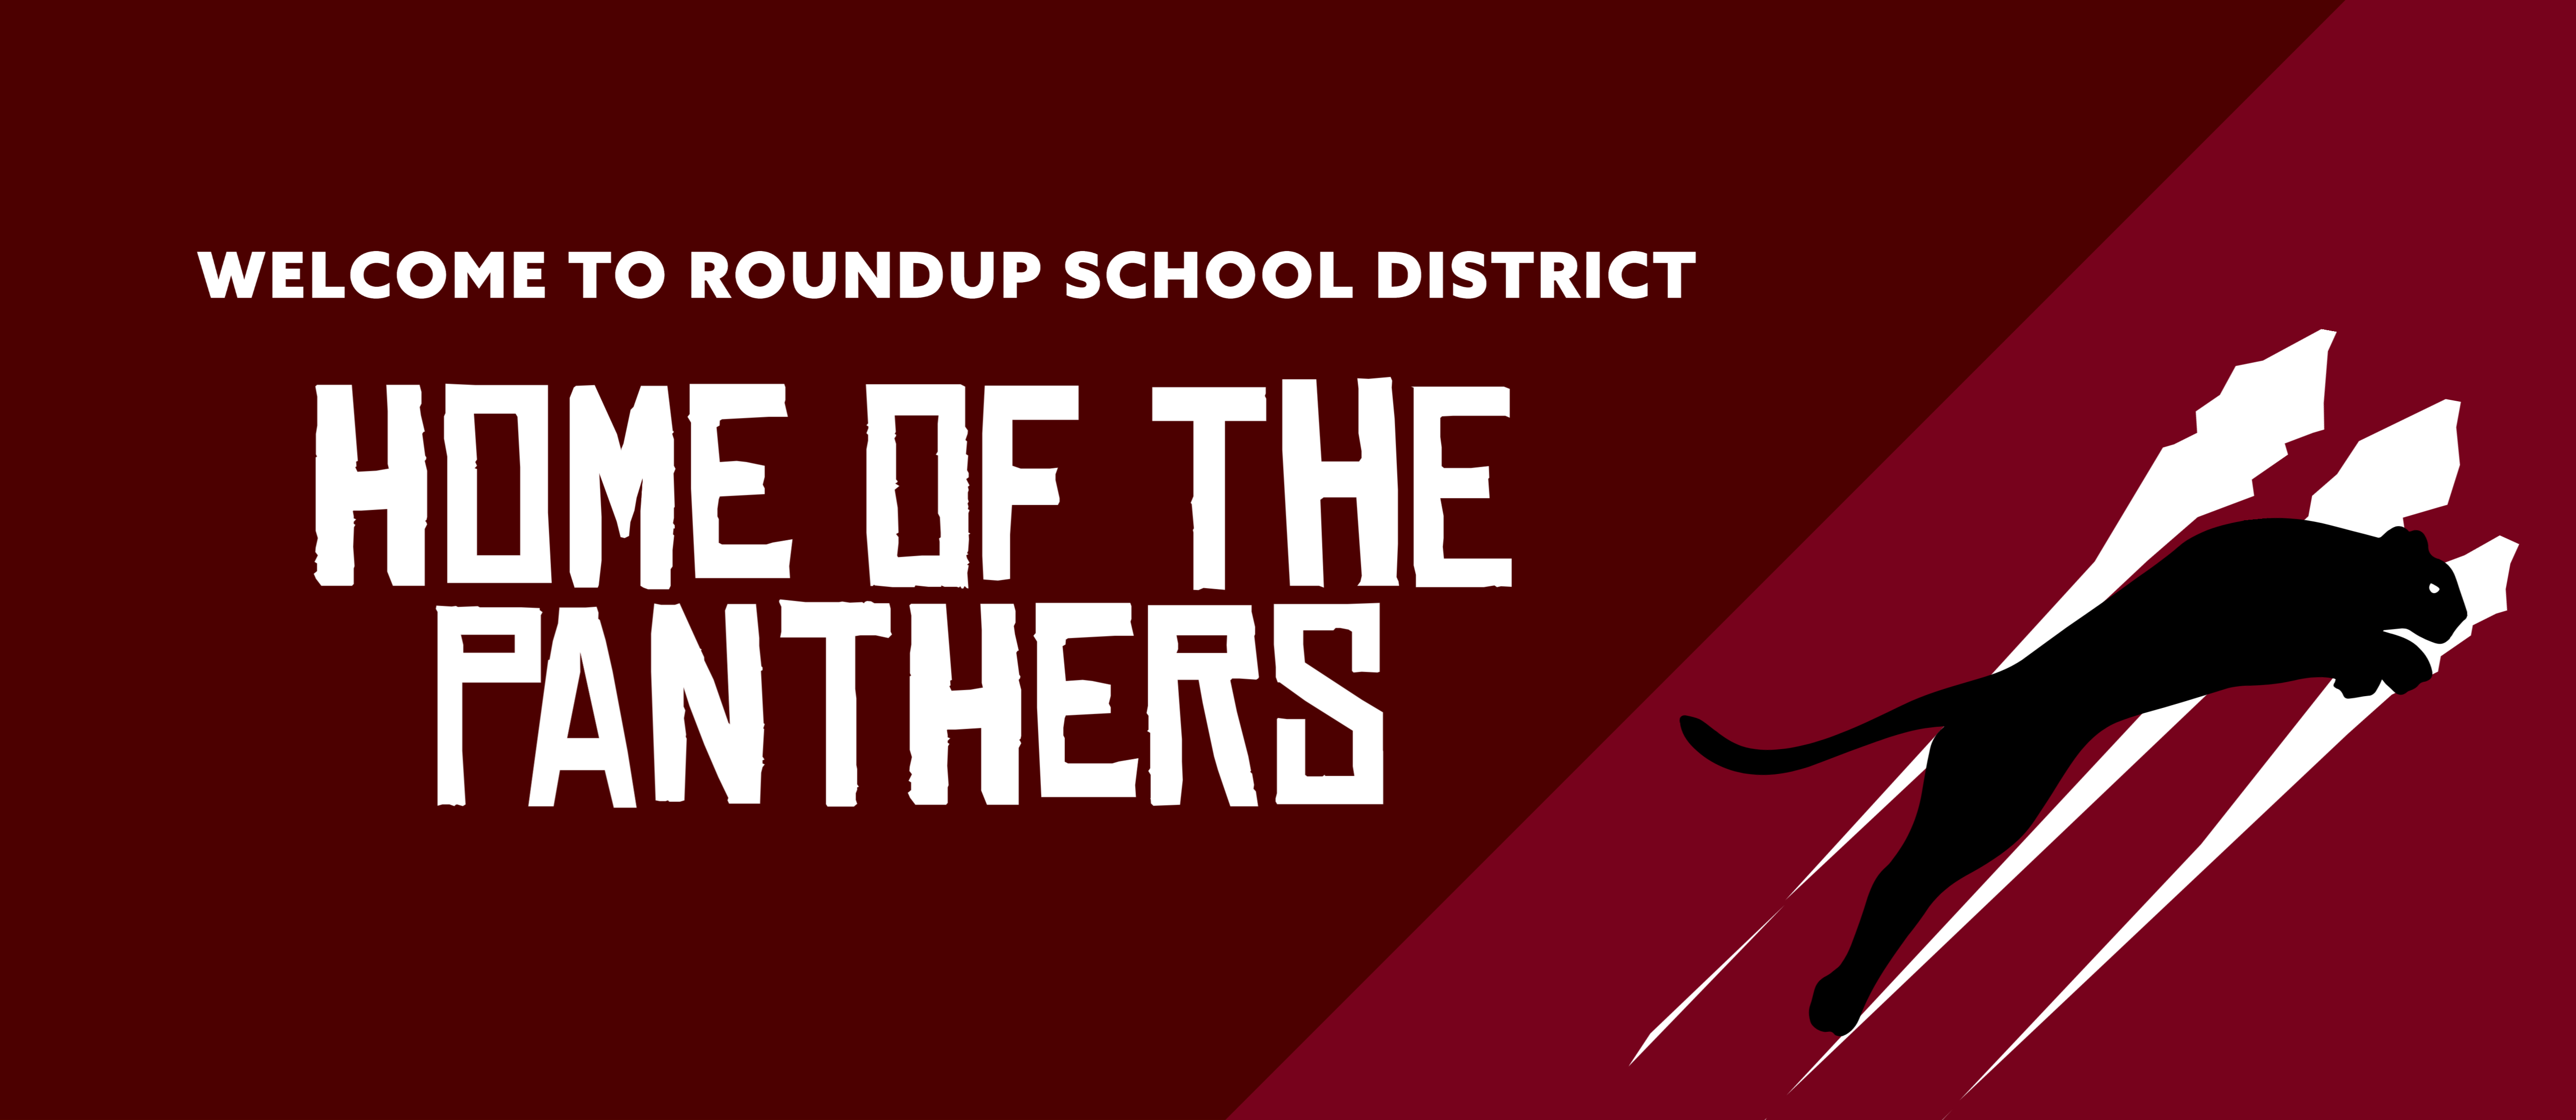 Welcome to Roundup School District: Home of the Panthers (with an image of the panther logo on a maroon background)